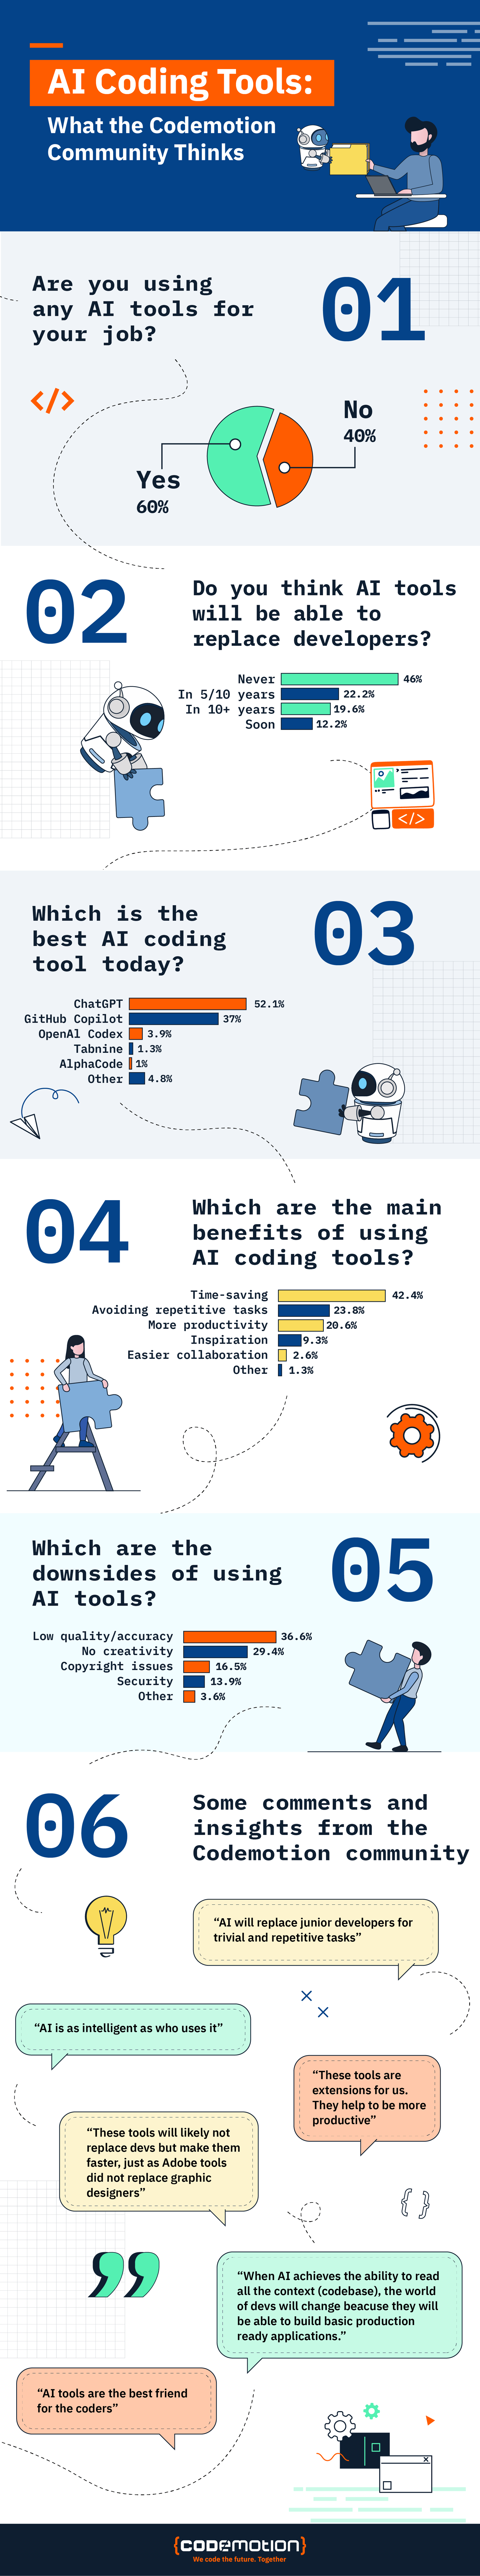 AI Coding Tools: a survey among the codemotion community. An infographic.